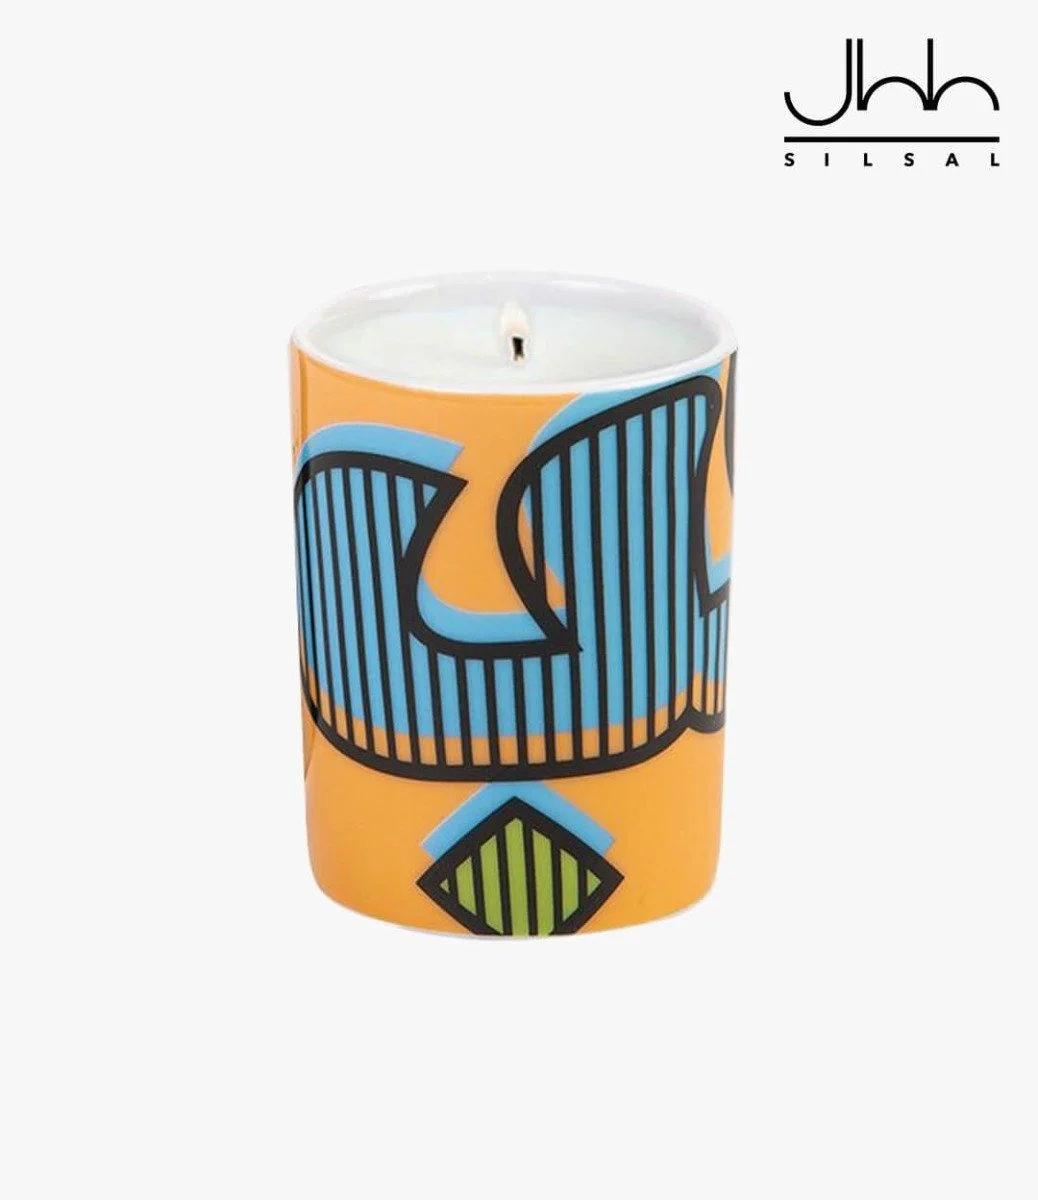 Hubb Mirage Candle (60g) By Silsal*